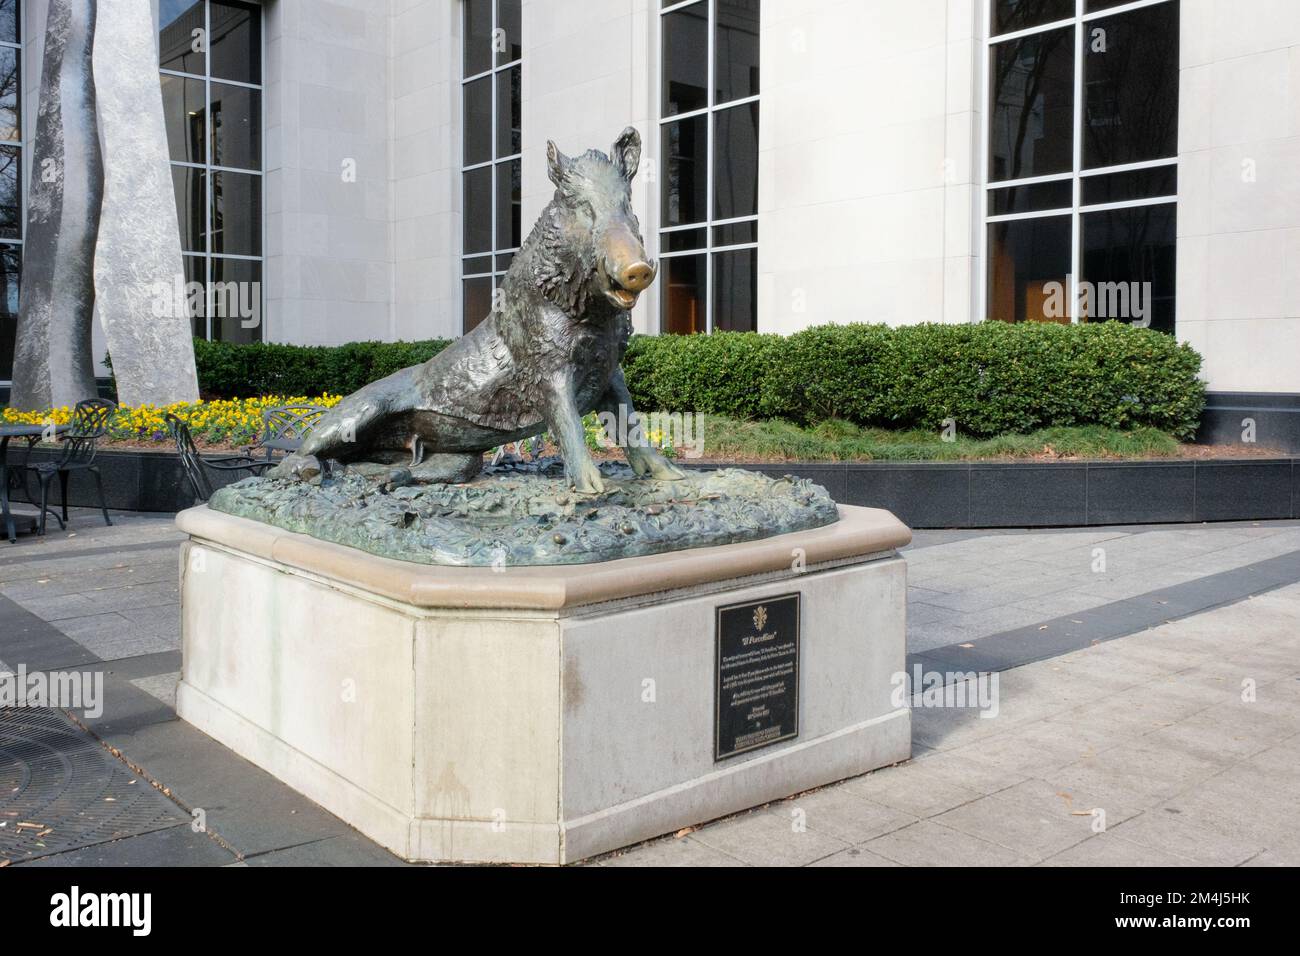 Statue of a Wild Boar in Downtown Greenville, South Carolina. Stock Photo